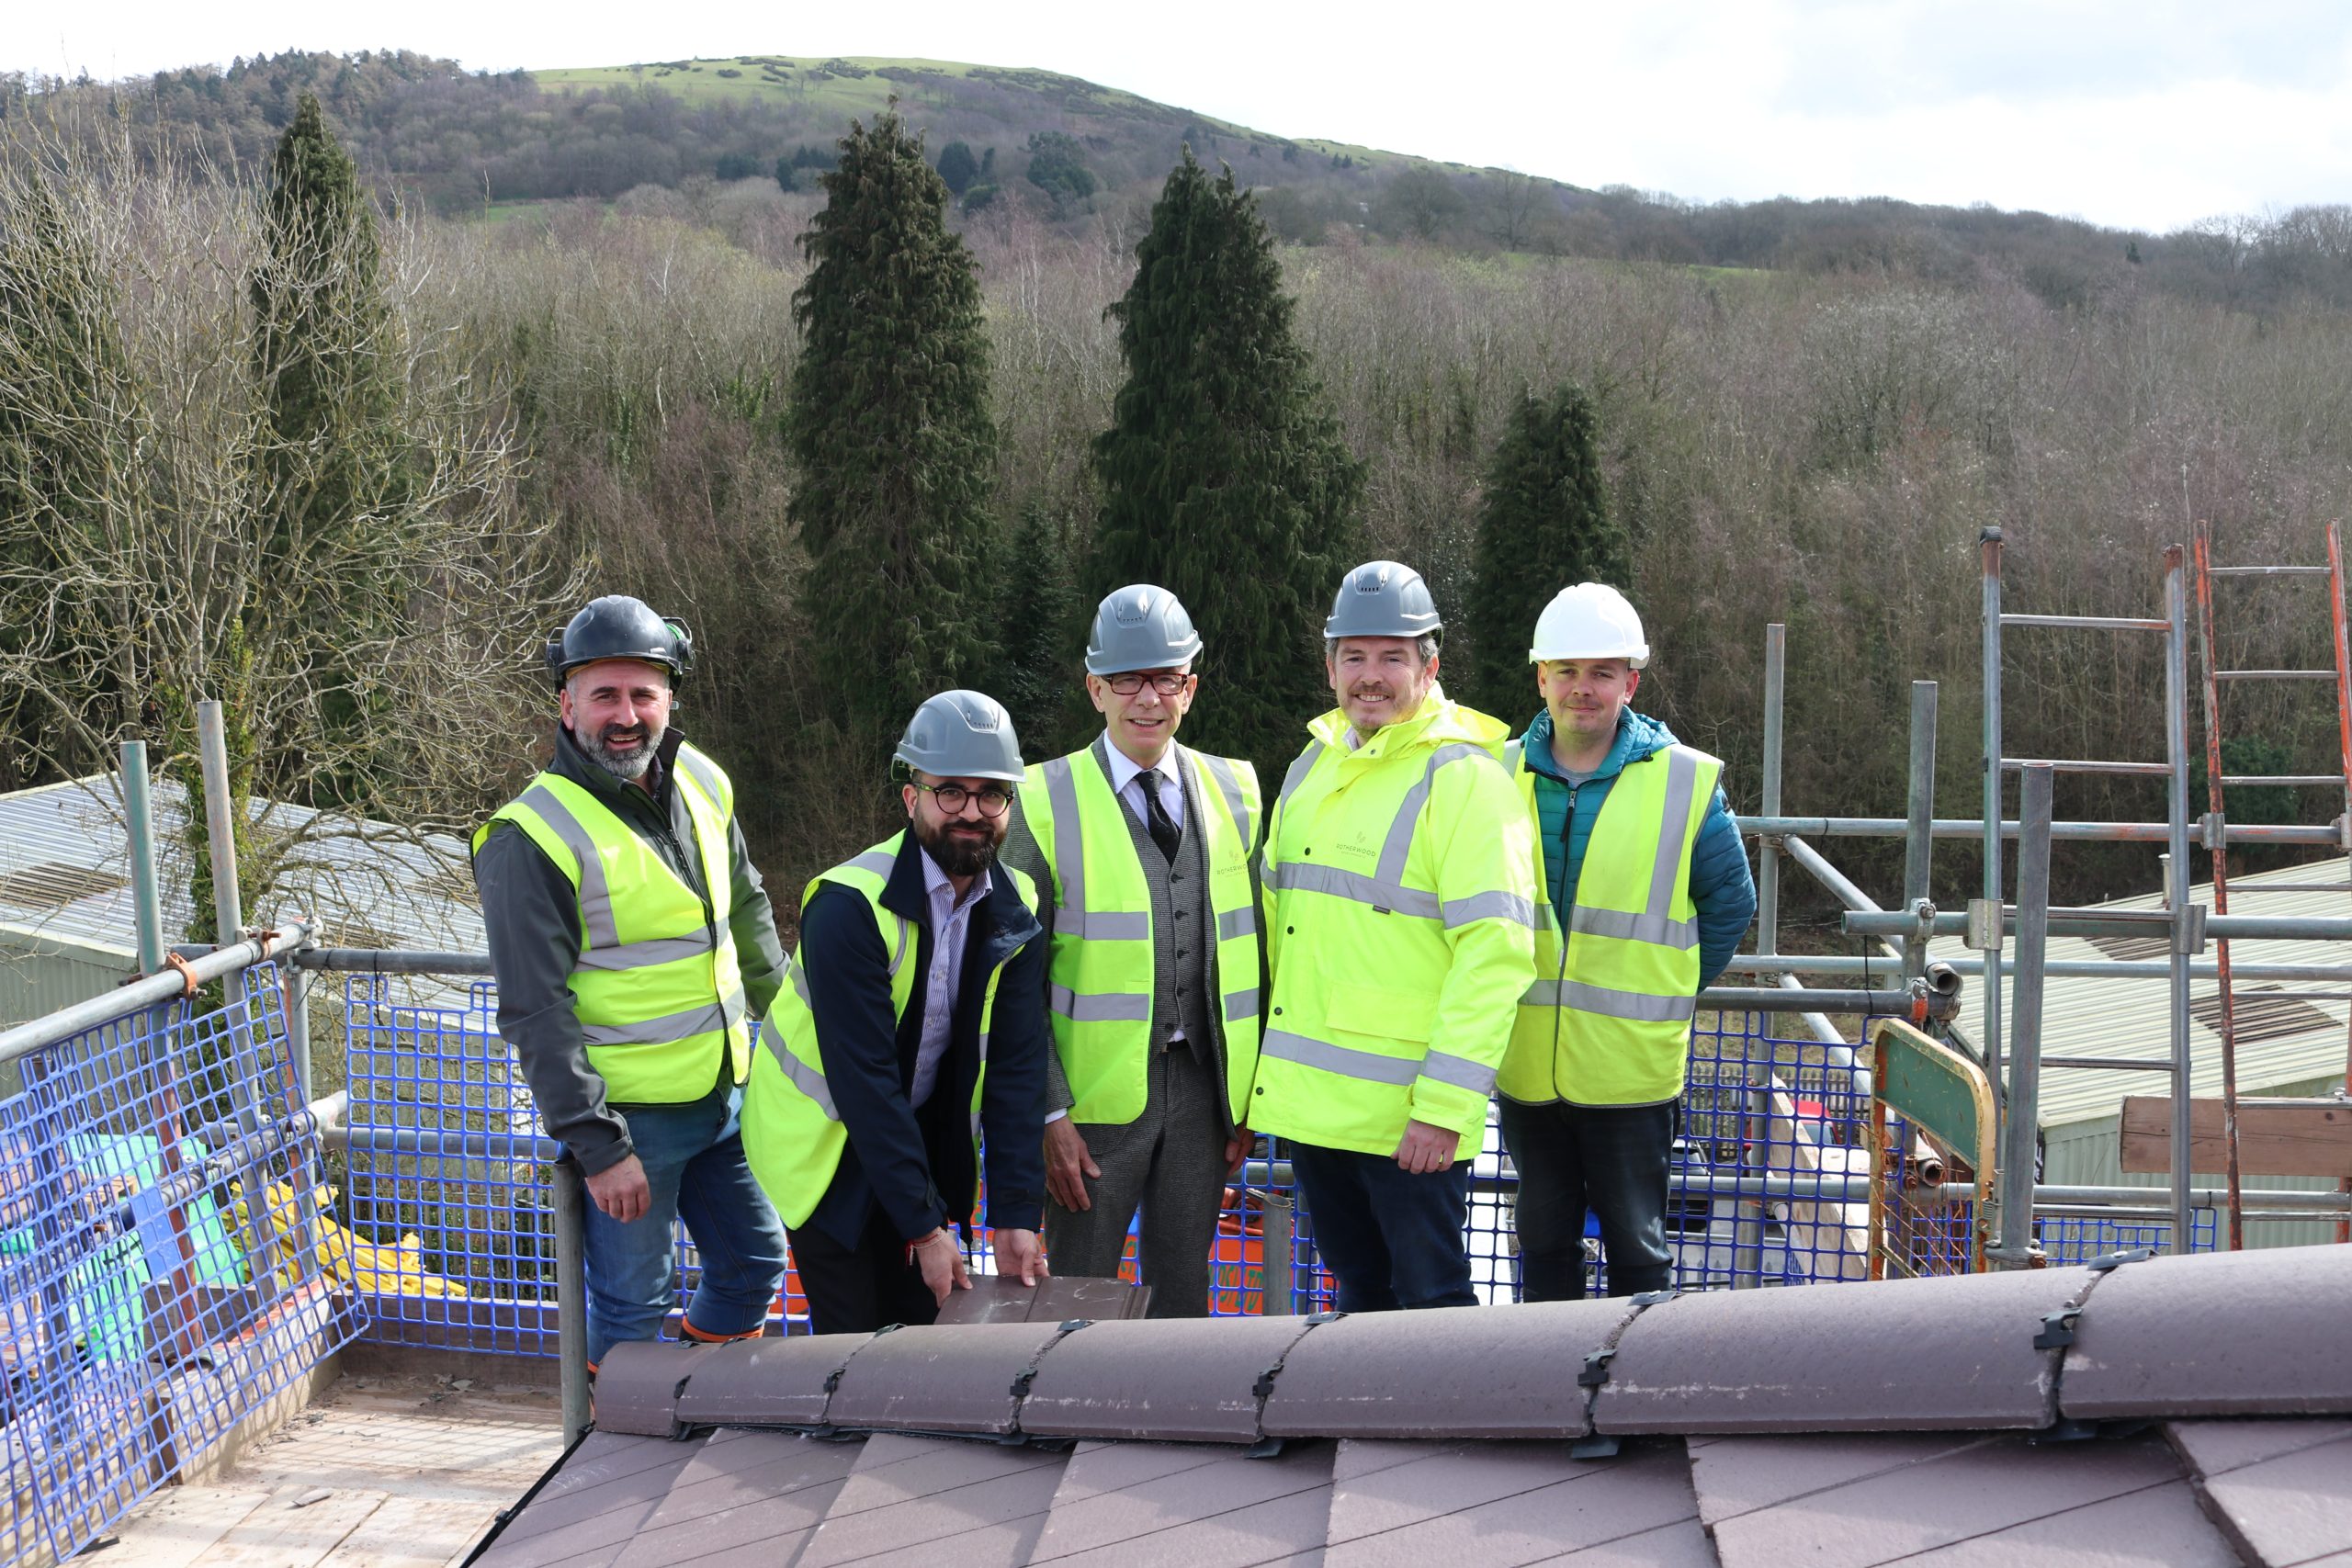 NEWS | Topping-out ceremony takes place at a new care home in the picturesque Herefordshire countryside